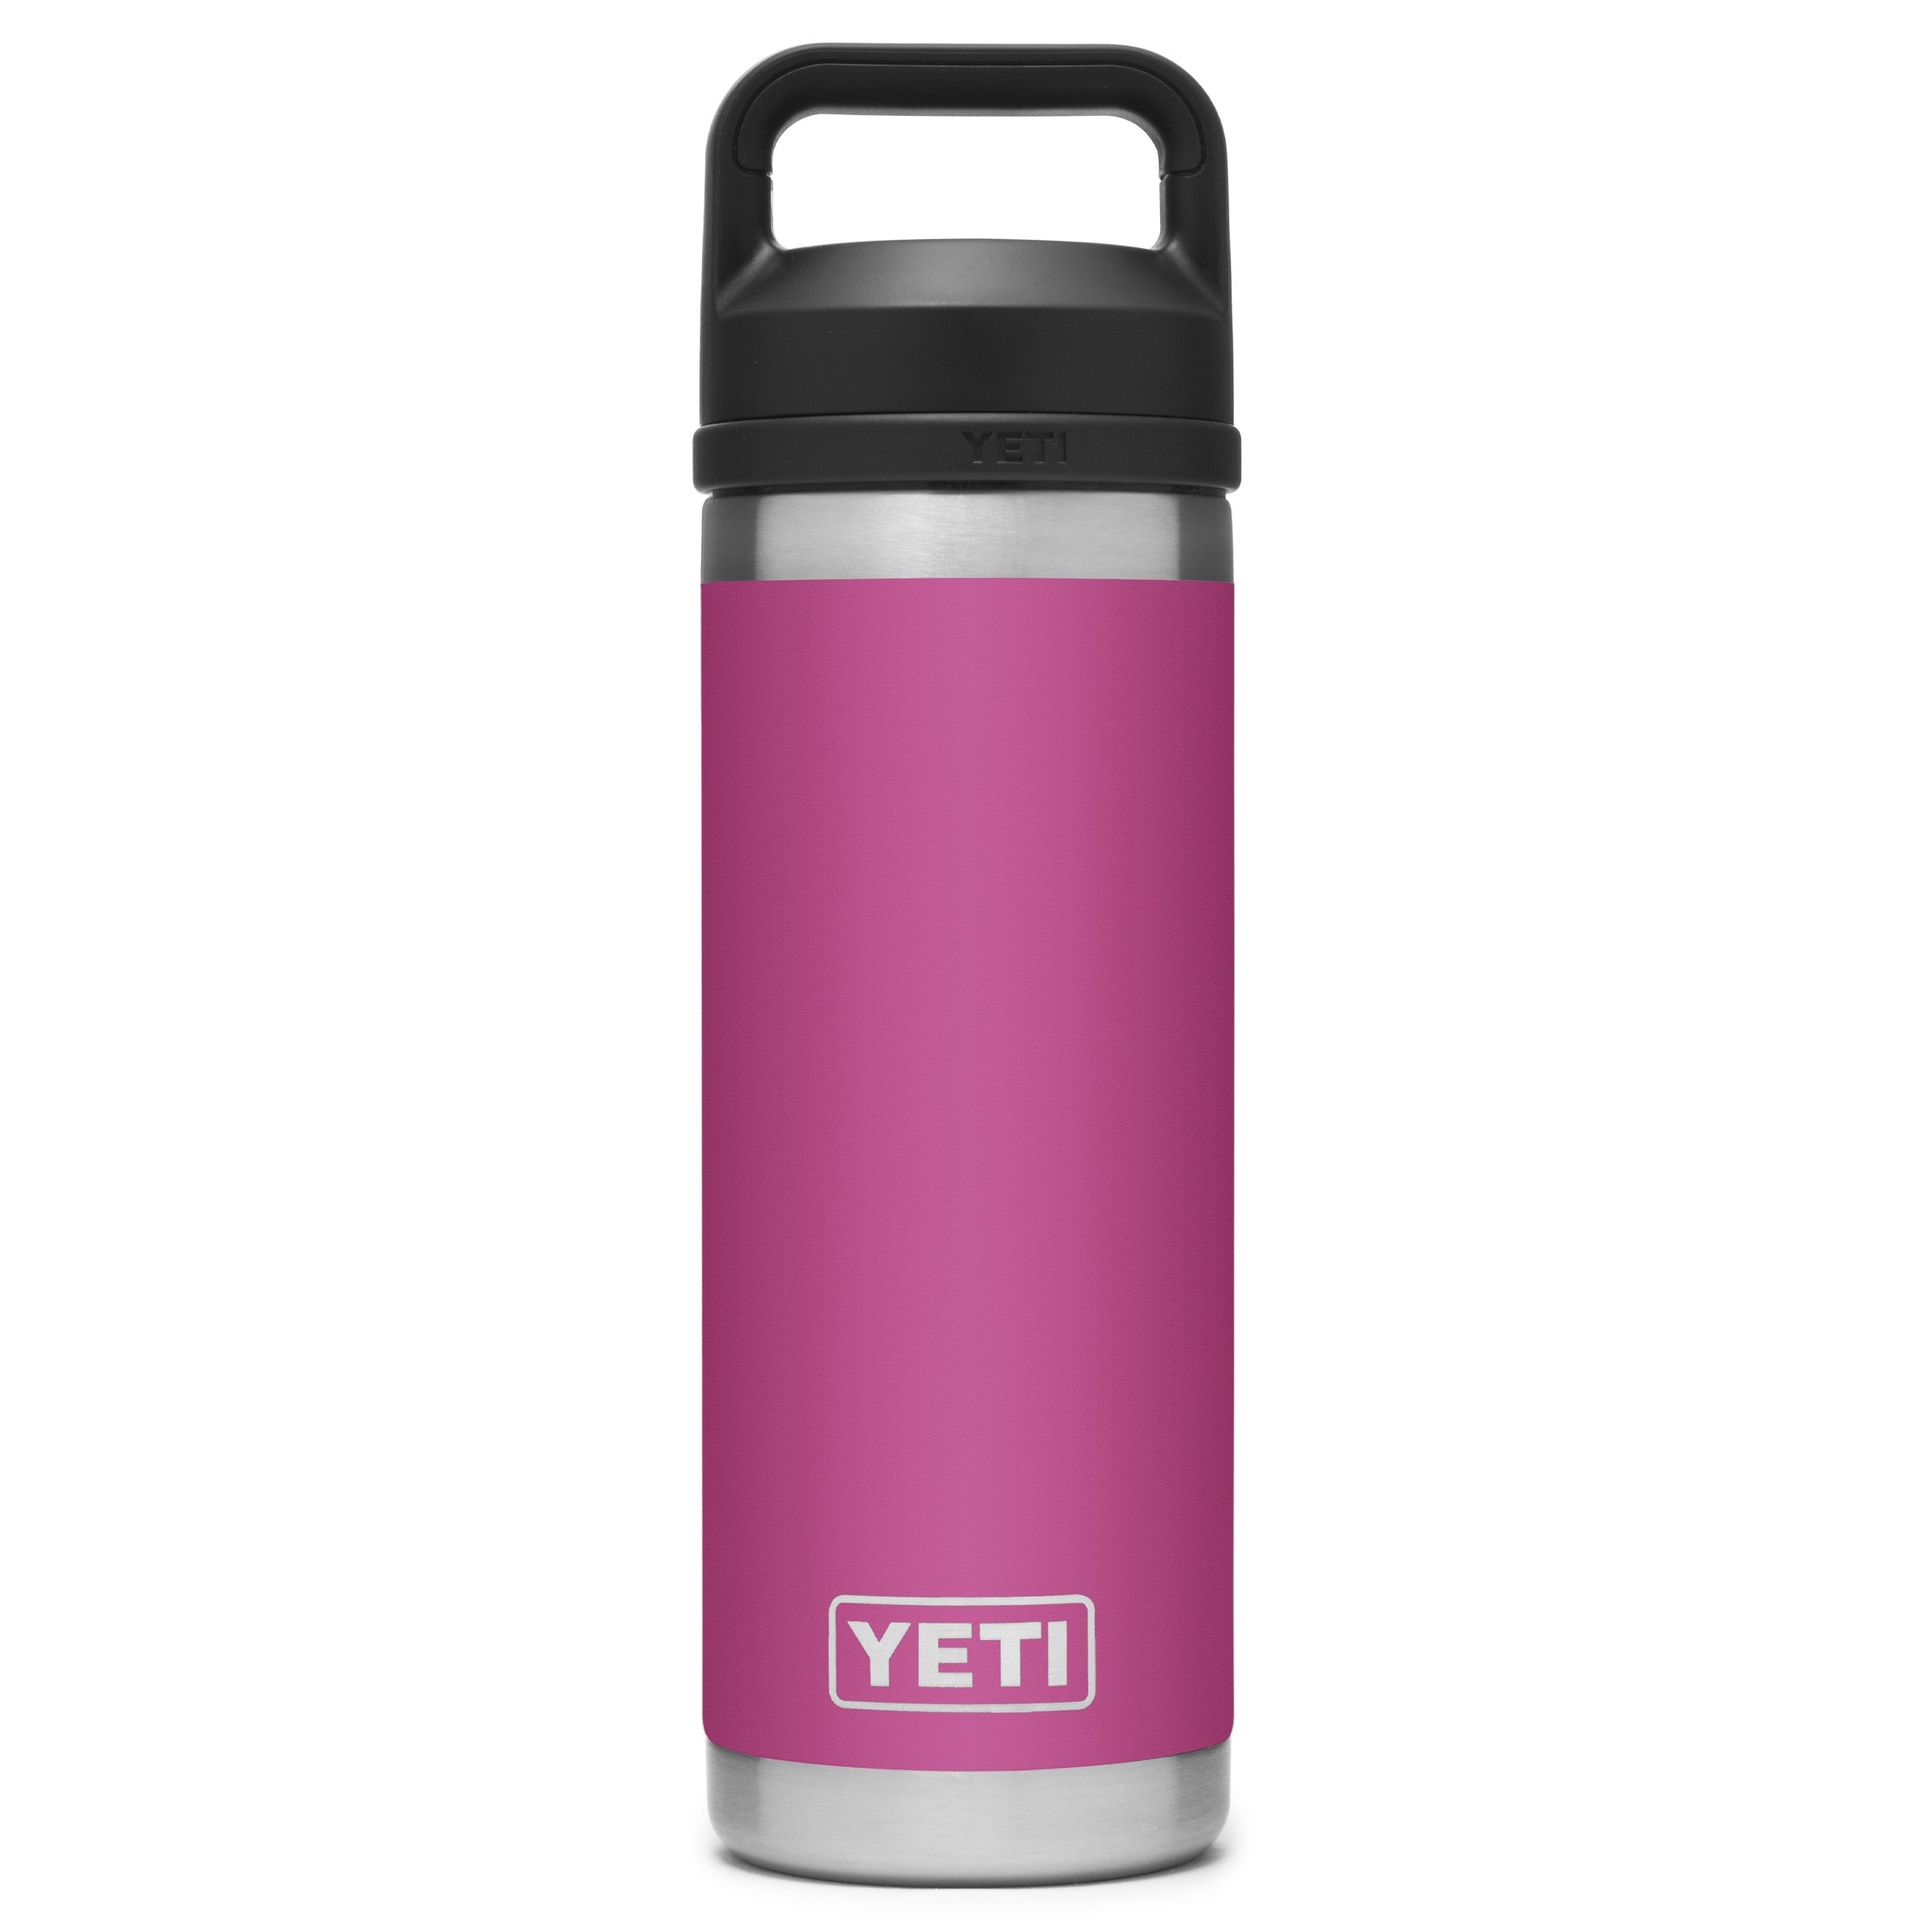 YETI Rambler 18 oz Bottle, Stainless Steel, Vacuum Insulated, with Hot Shot  Cap